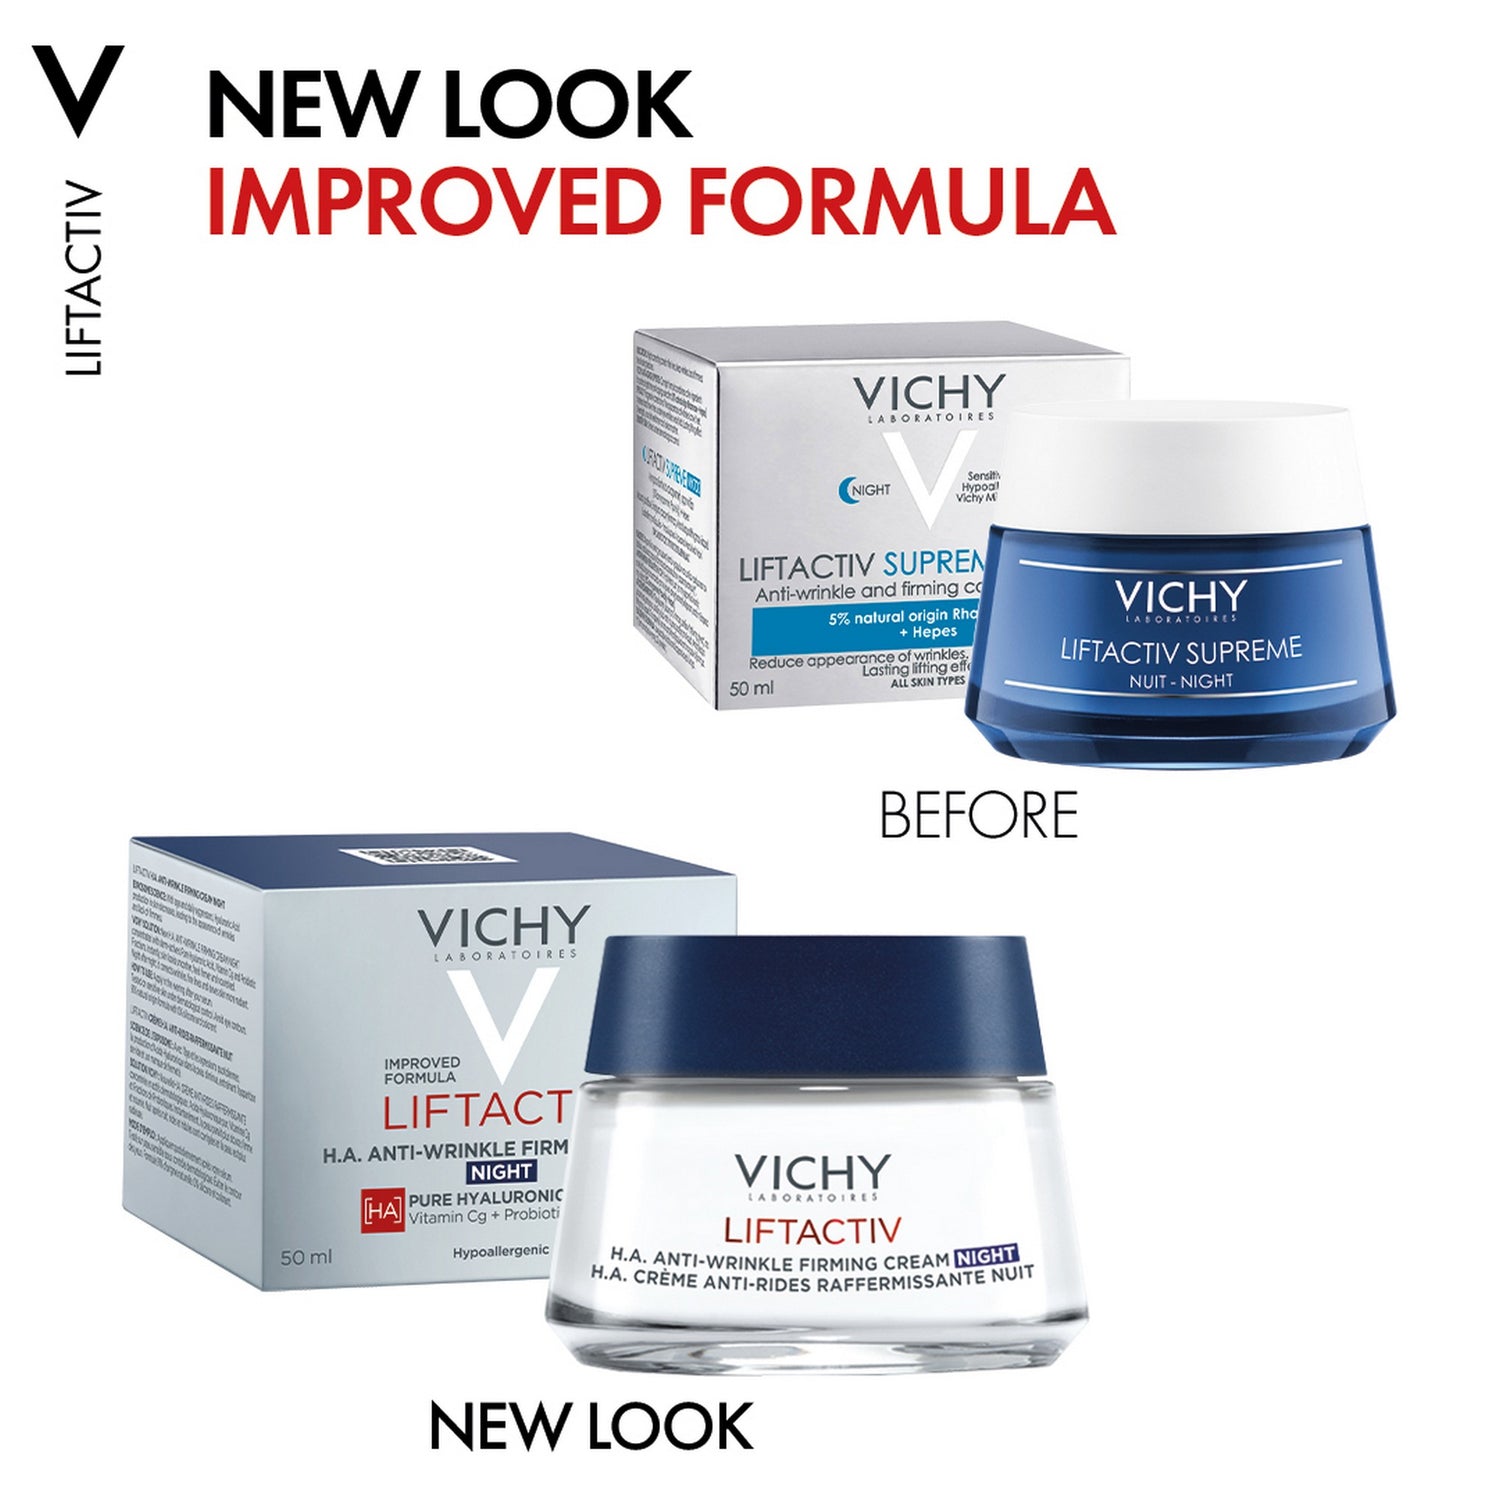 Vichy LiftActiv Complete Anti-Wrinkle and Firming Night Care 50ml Packaging